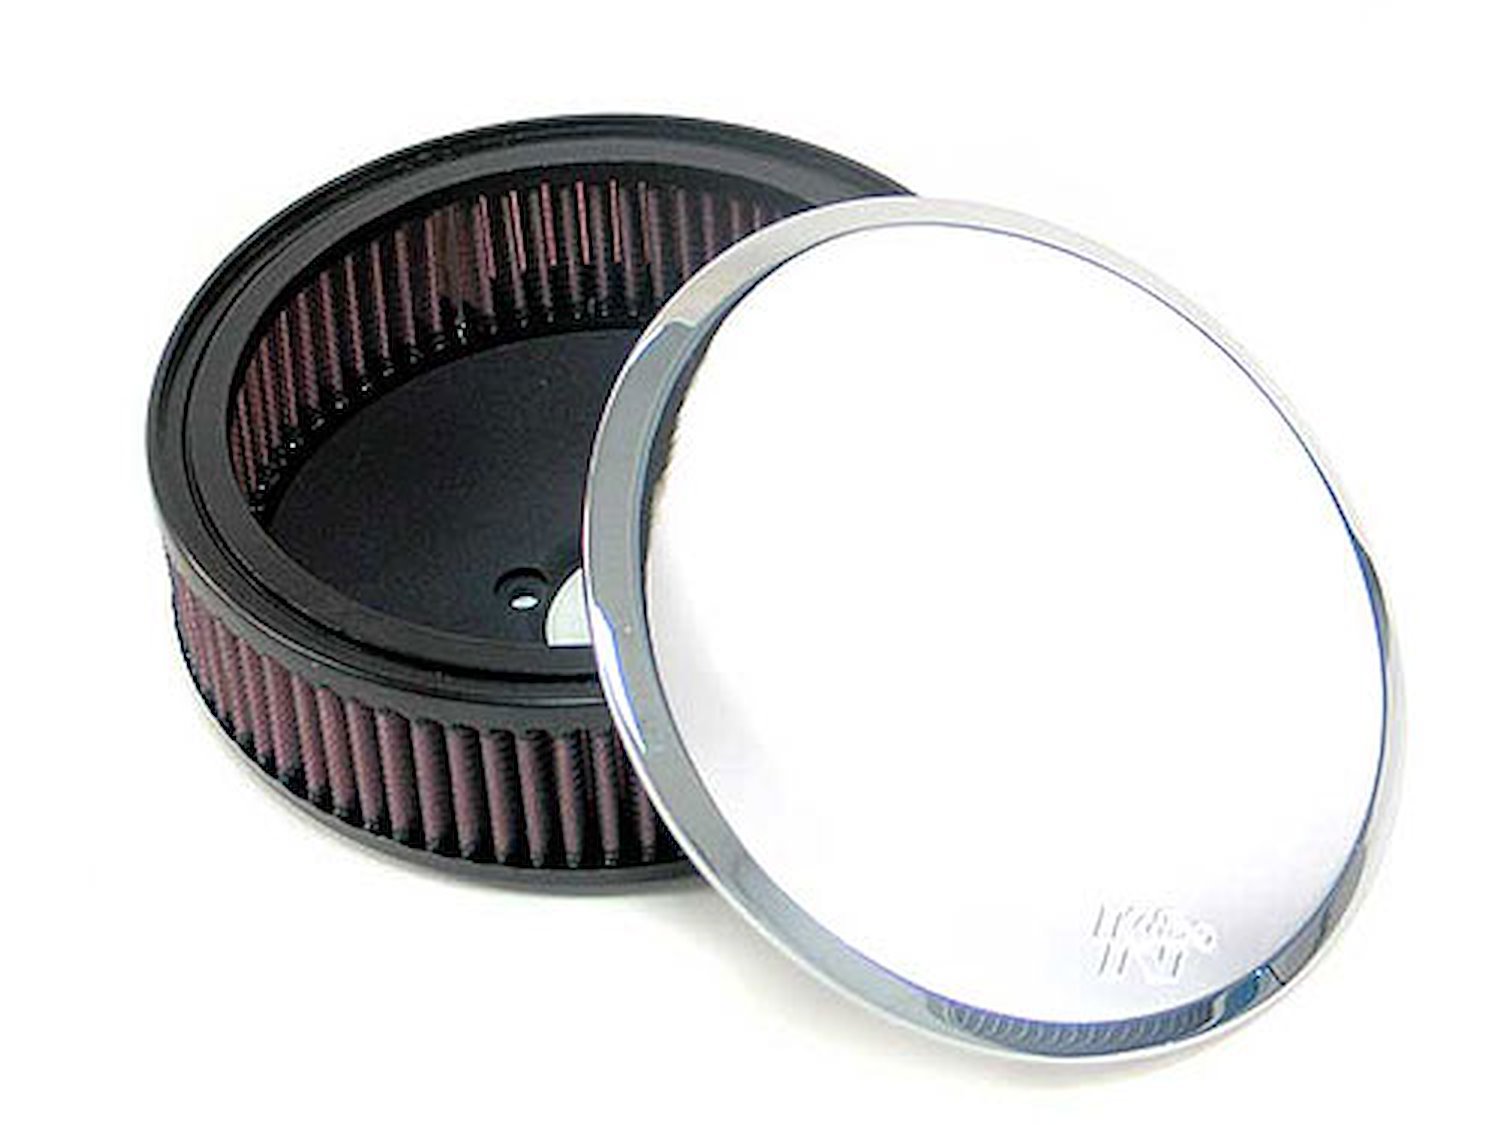 High-Performance Replacement Air Filter 1992-1997 Hareley Davidson F Series